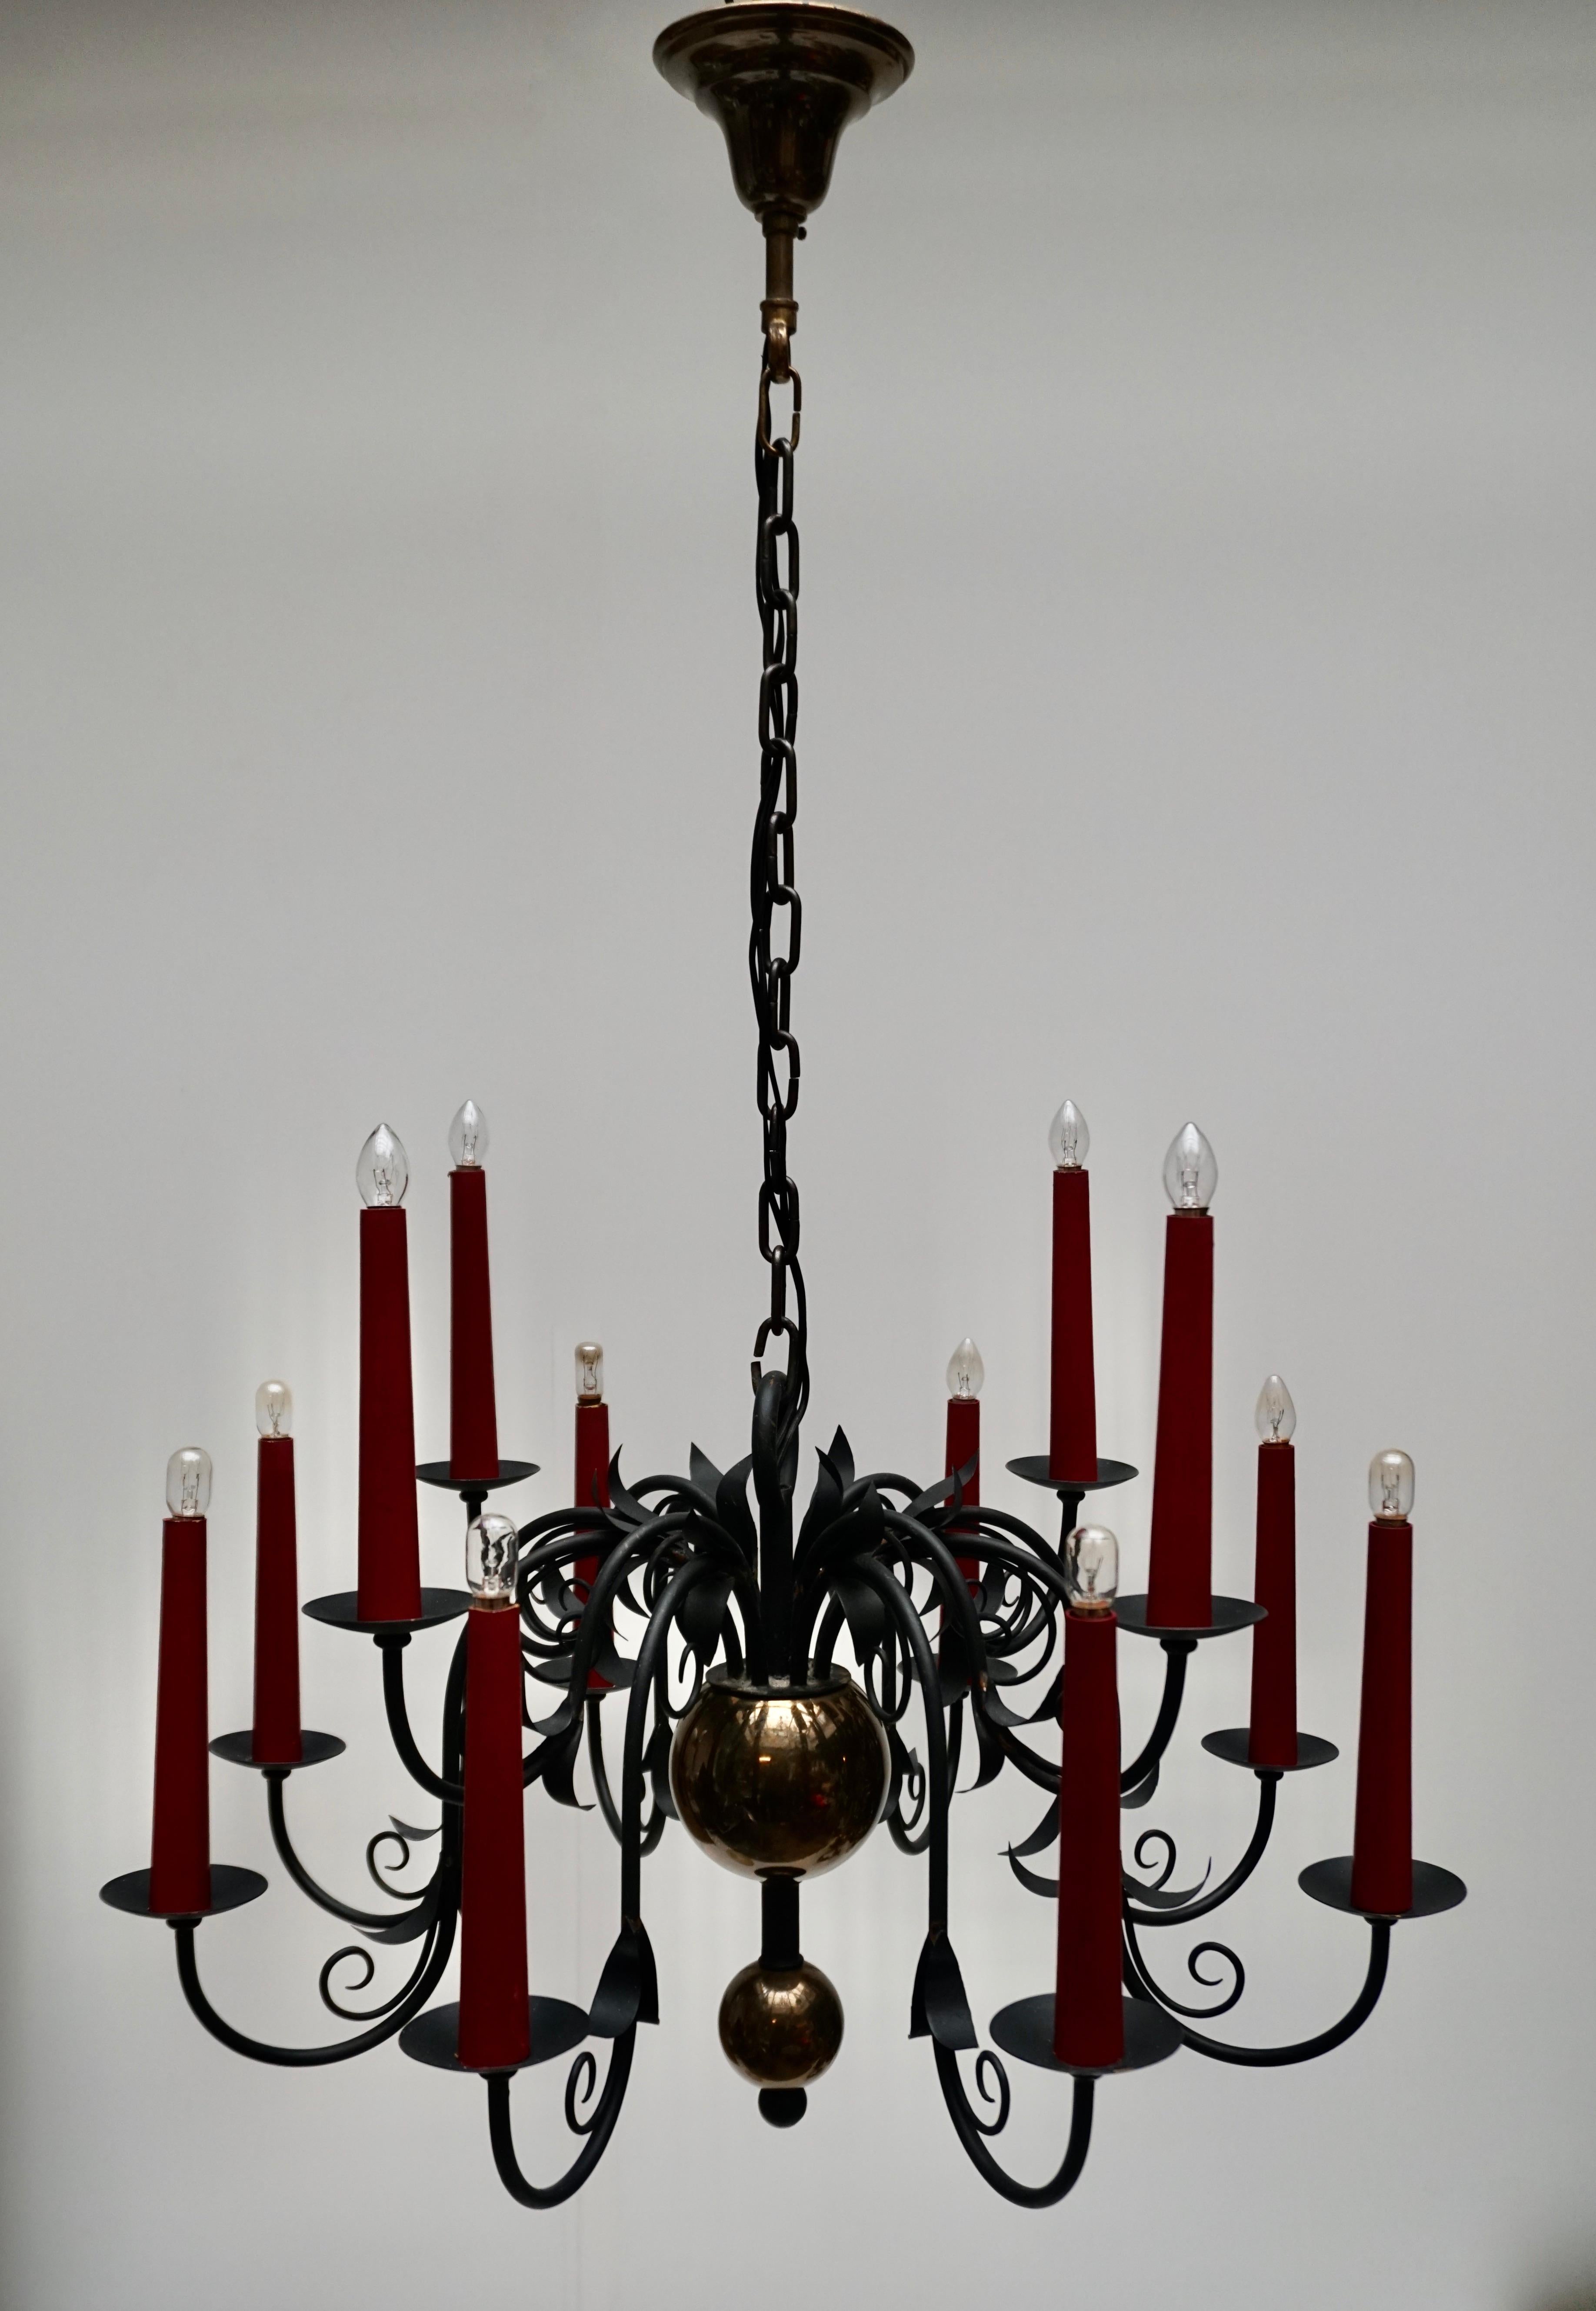 1950s Black Wrought Iron Gothic Chandelier with 12 Red Candlesticks 6